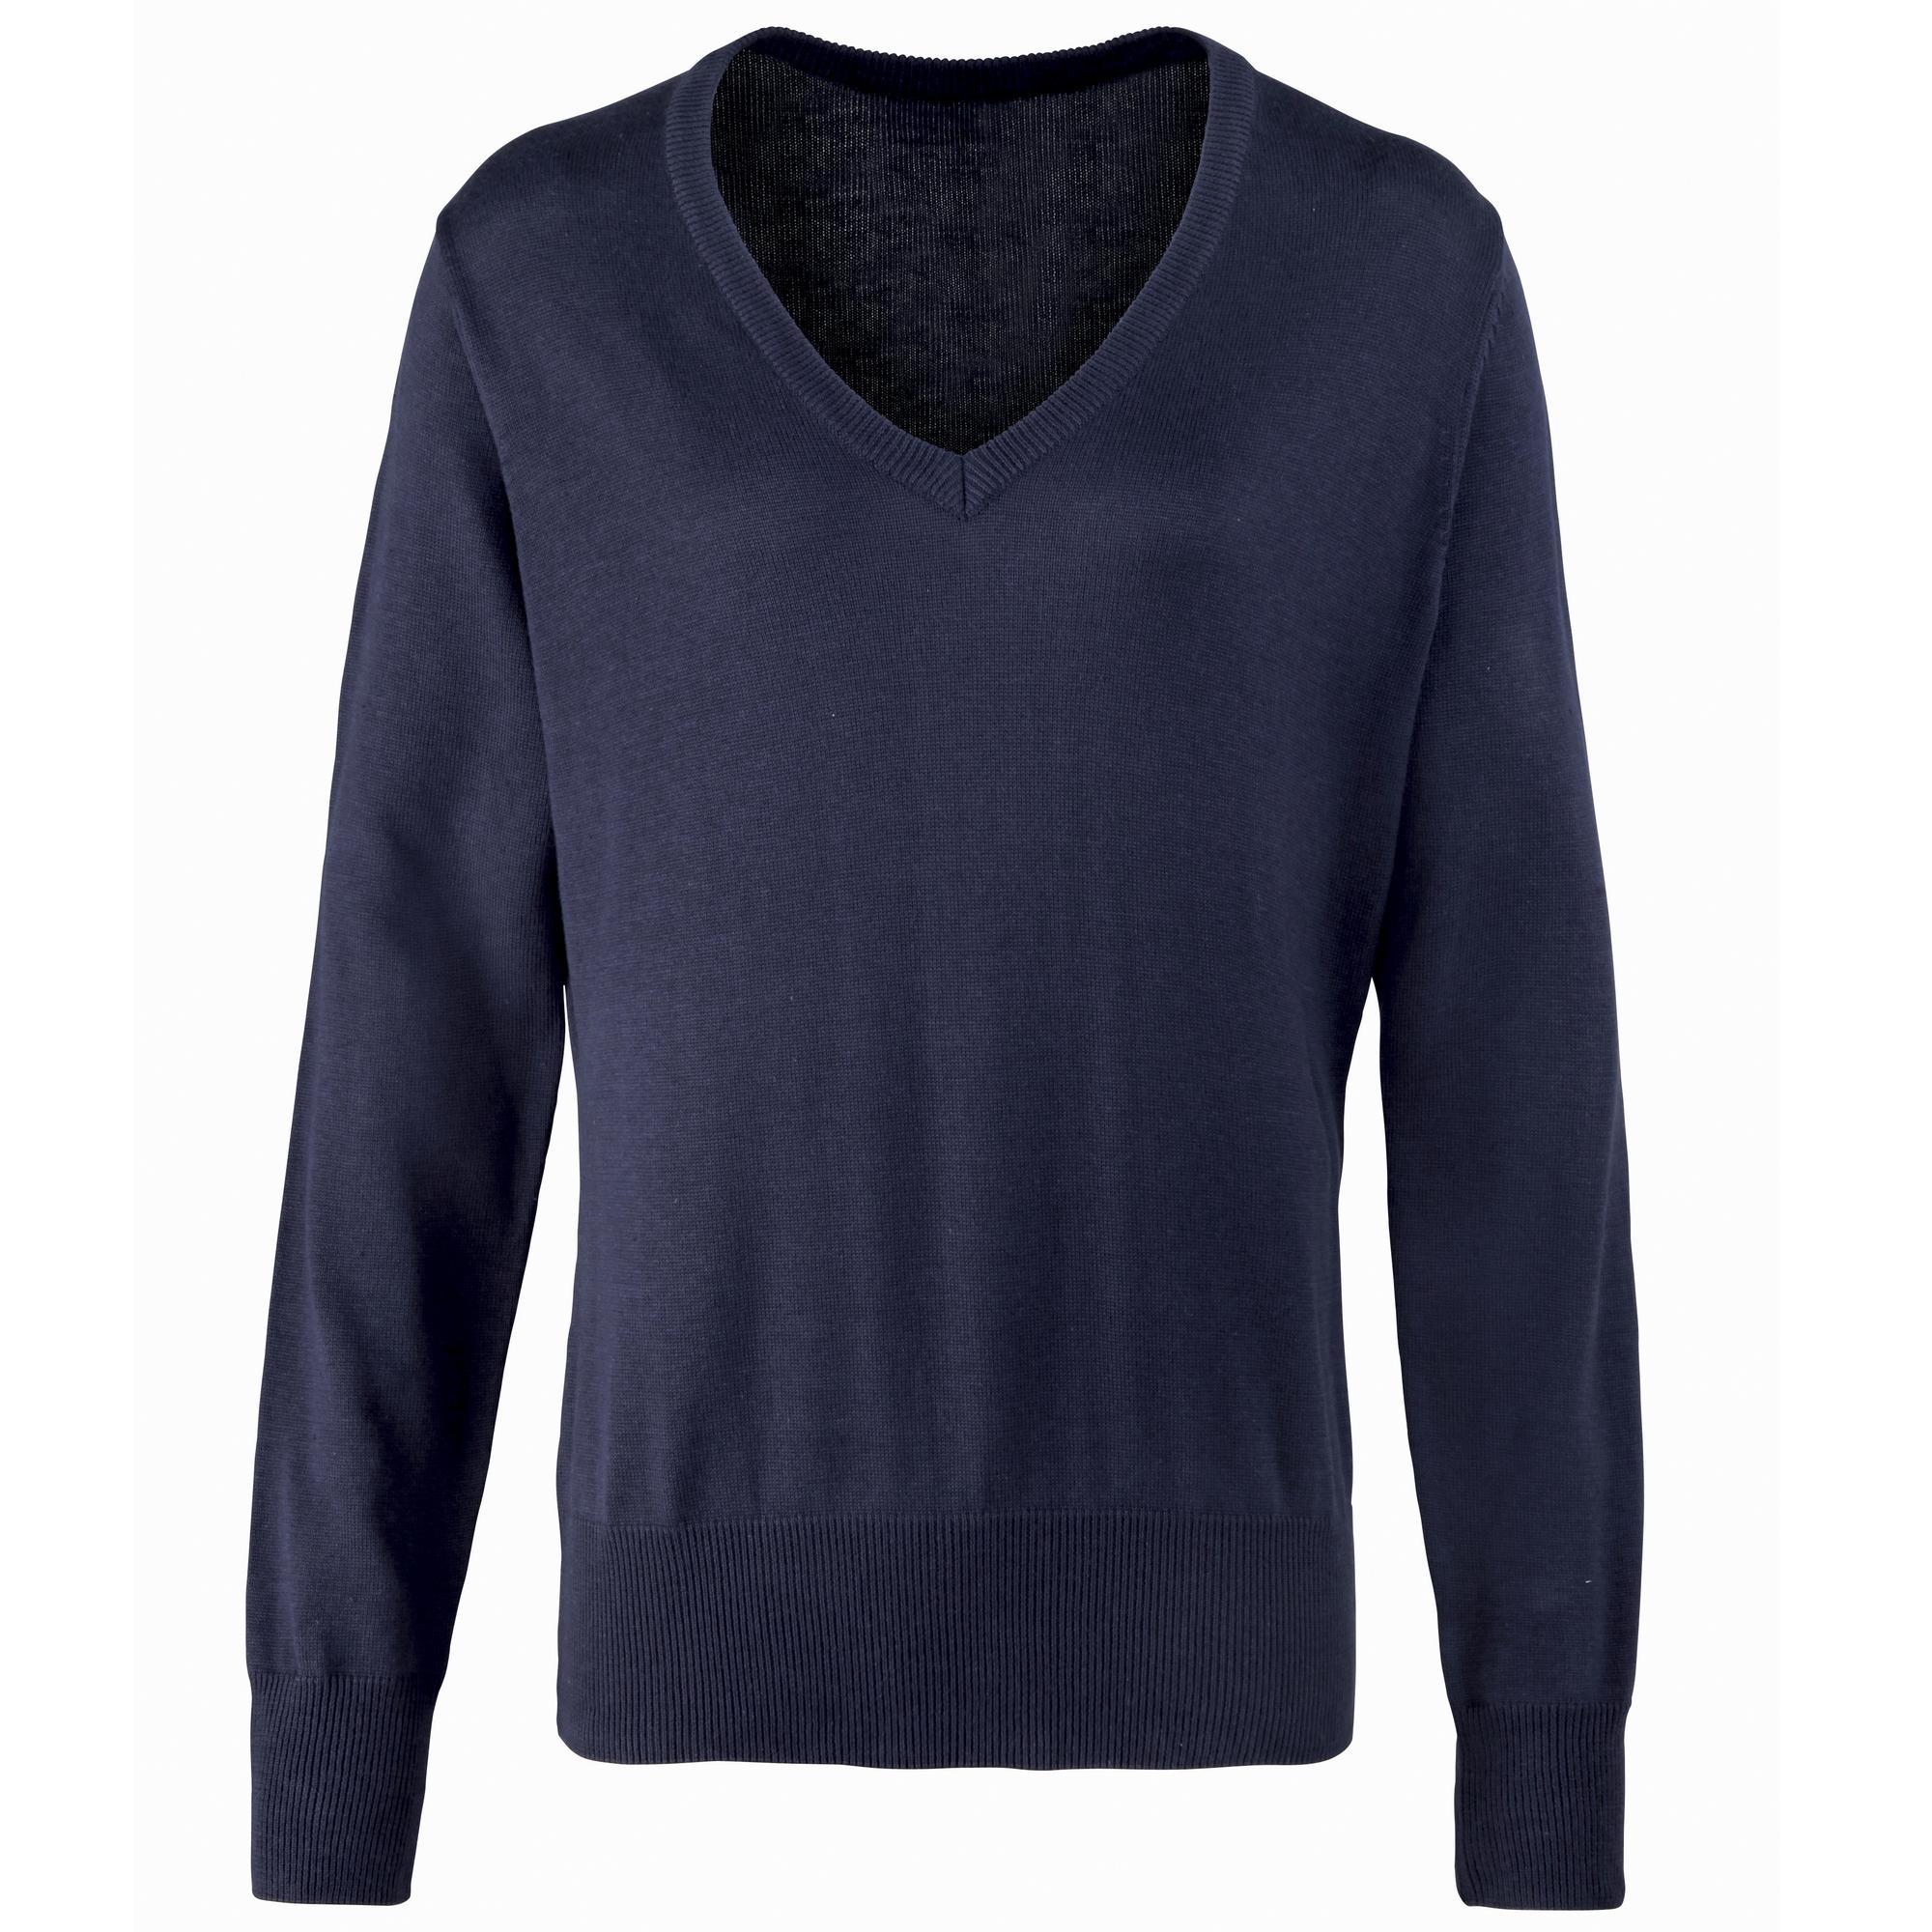 Premier Womens/Ladies V-Neck Knitted Sweater / Top (Navy) (10)